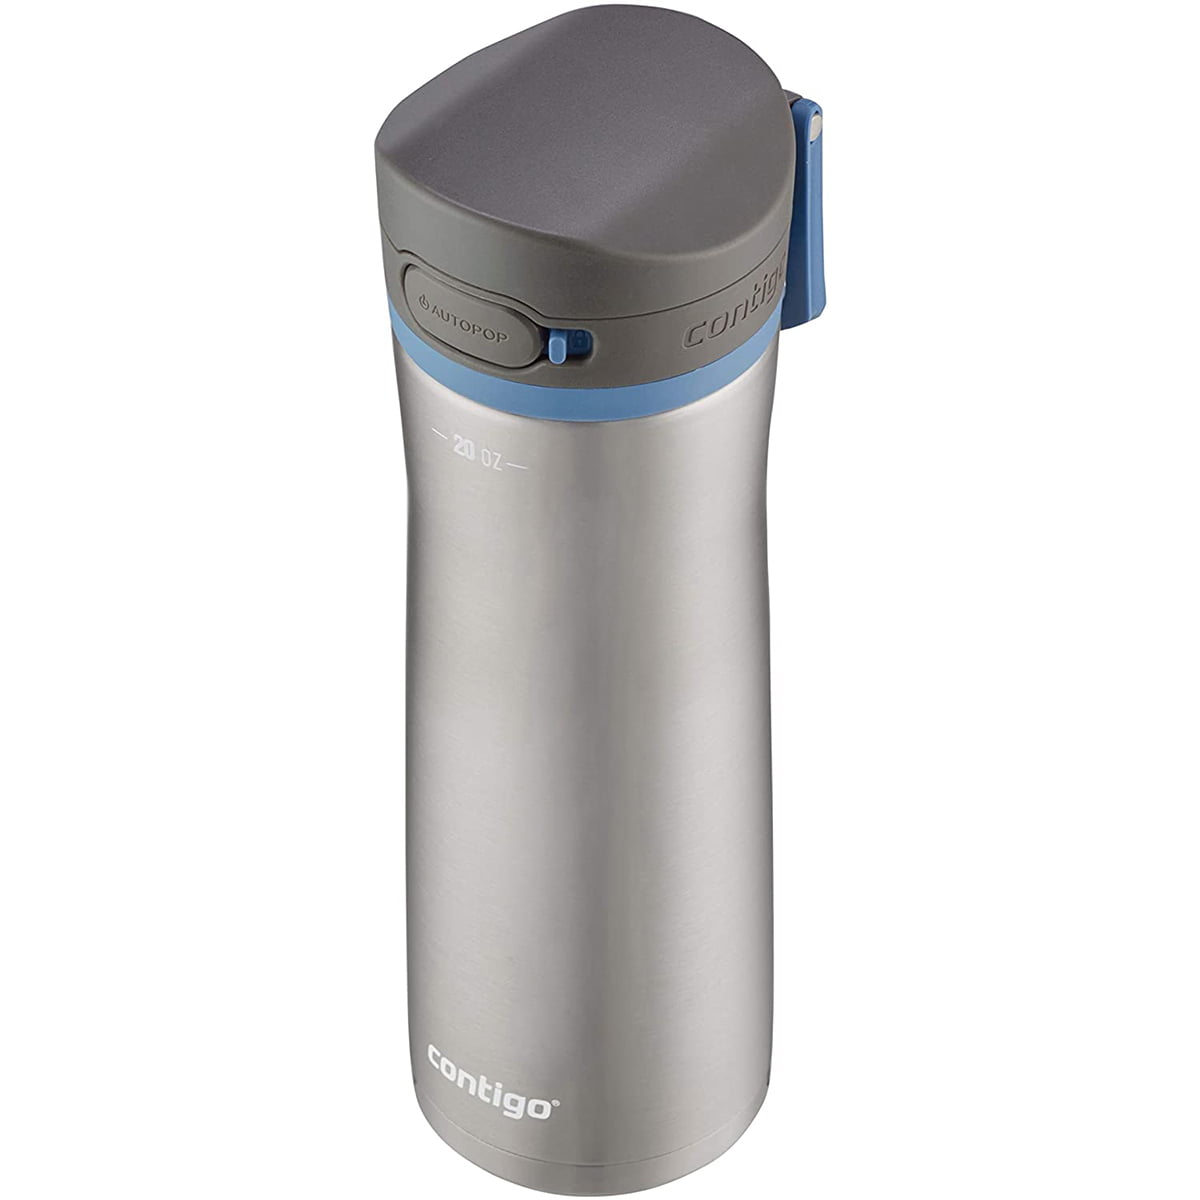 Contigo River North Stainless Steel 2-in-1 Can Cooler and Tumbler Dark Ice, 12 fl oz.